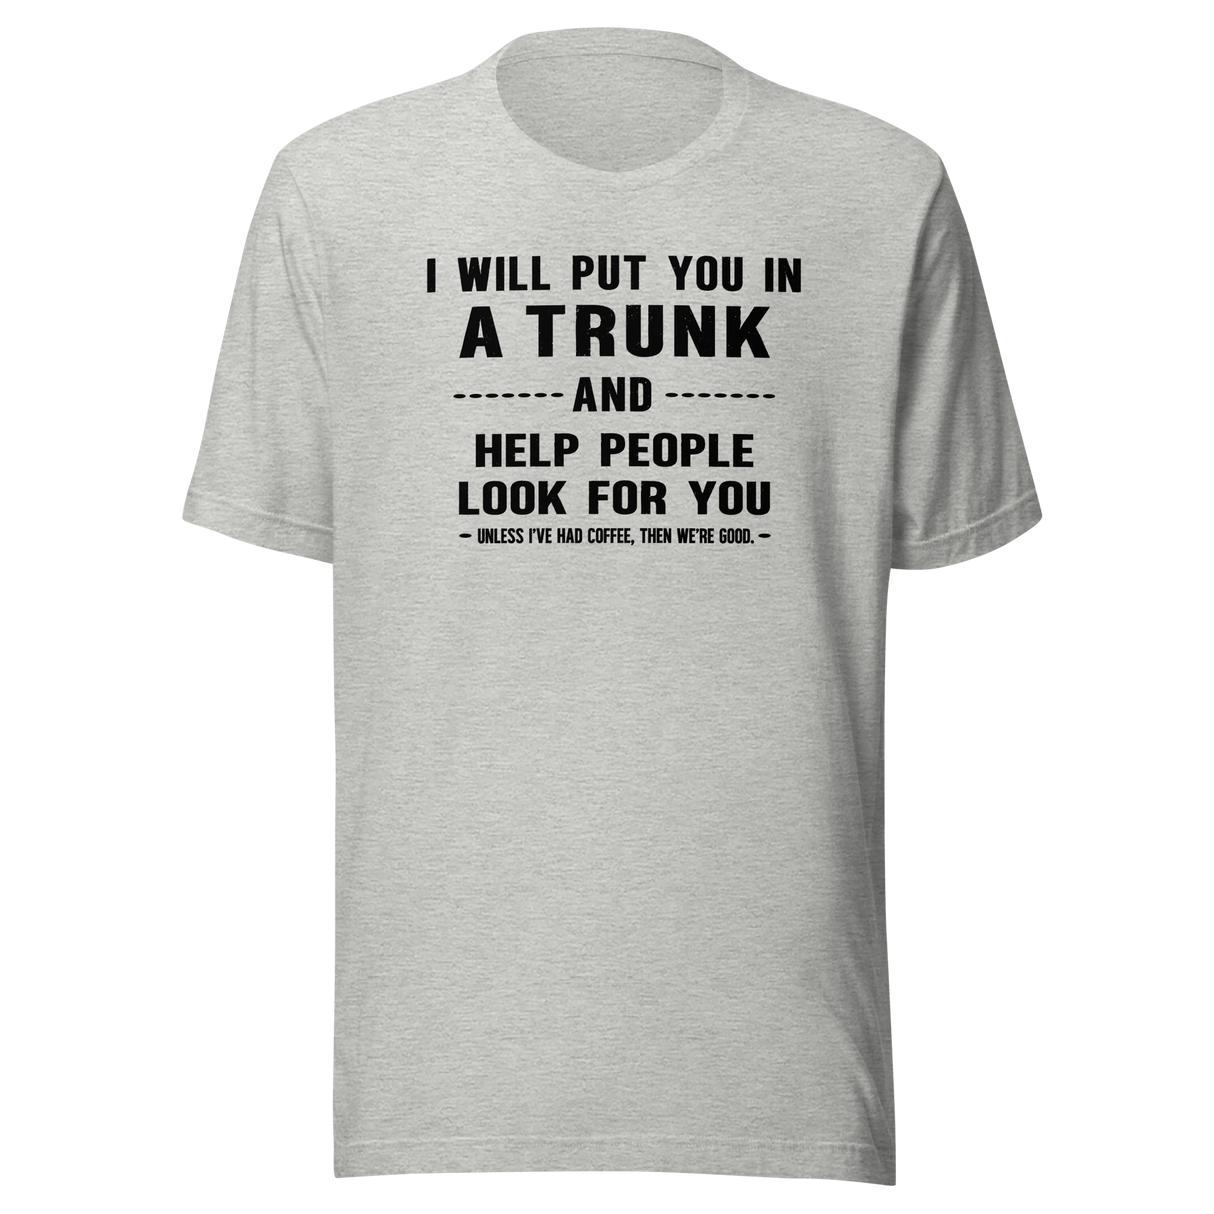 i-will-put-you-in-a-trunk-and-help-people-look-for-you-unless-ive-had-coffee-then-were-good-coffee-tee-life-t-shirt-coffee-tee-caffeine-t-shirt-humor-tee#color_athletic-heather